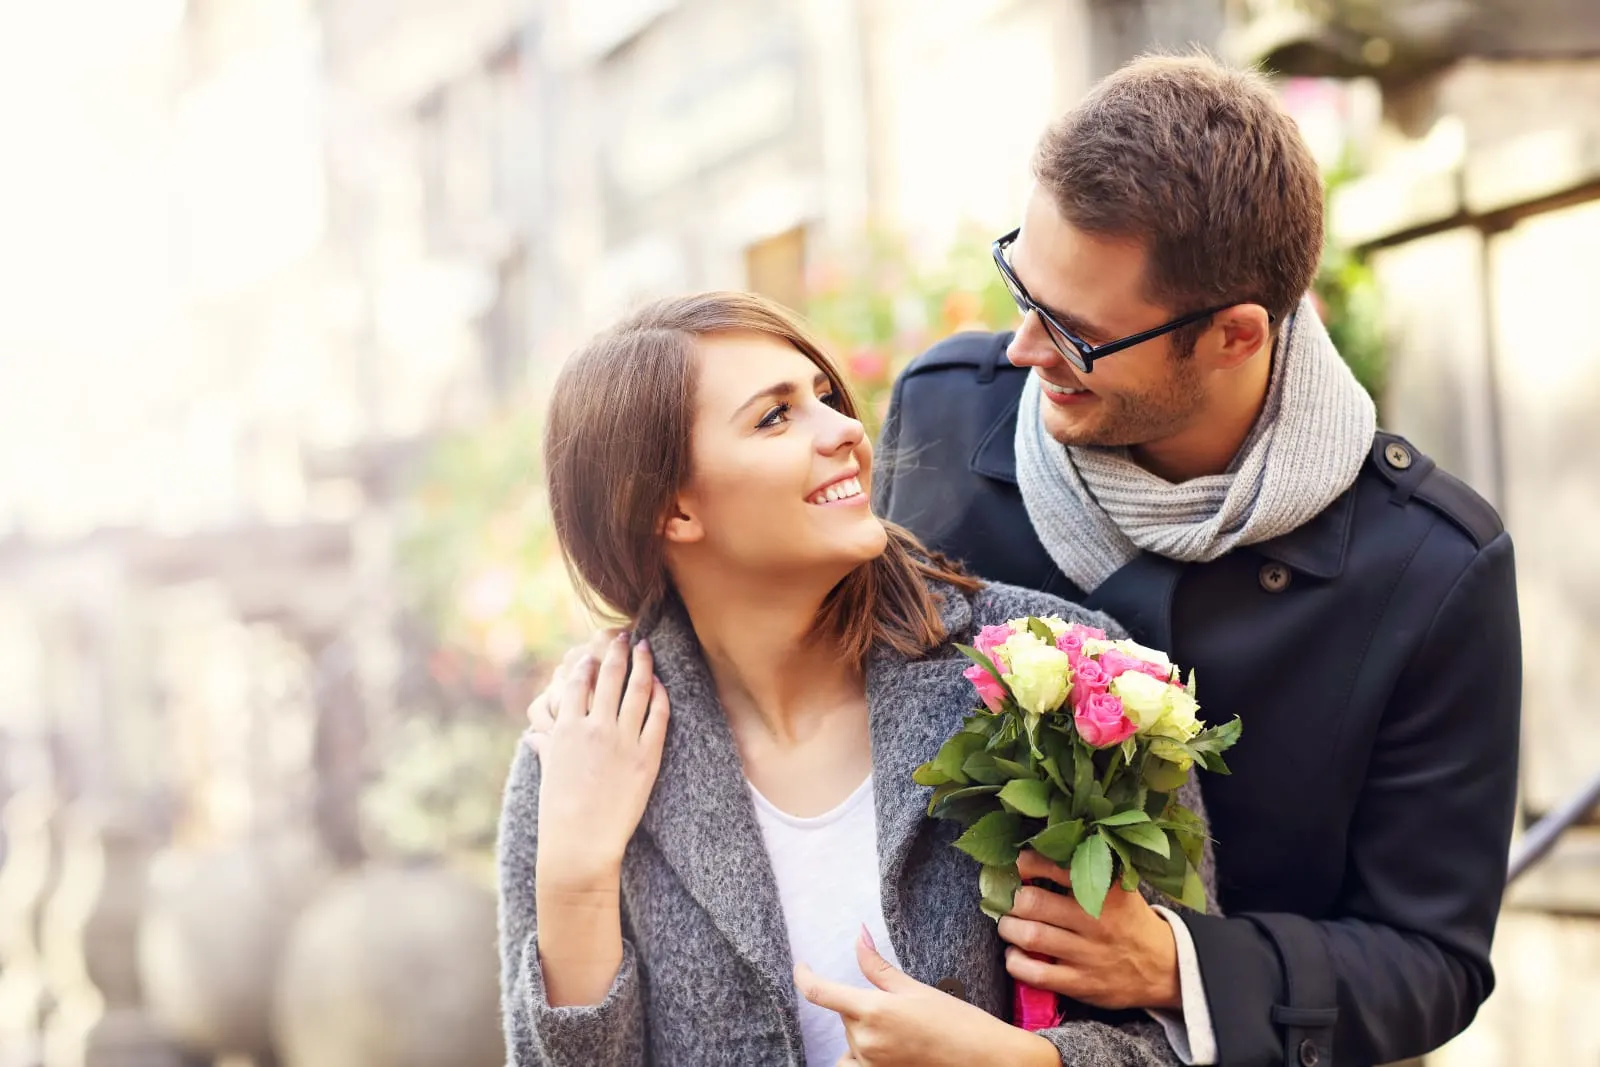 a man gives flowers to a girl